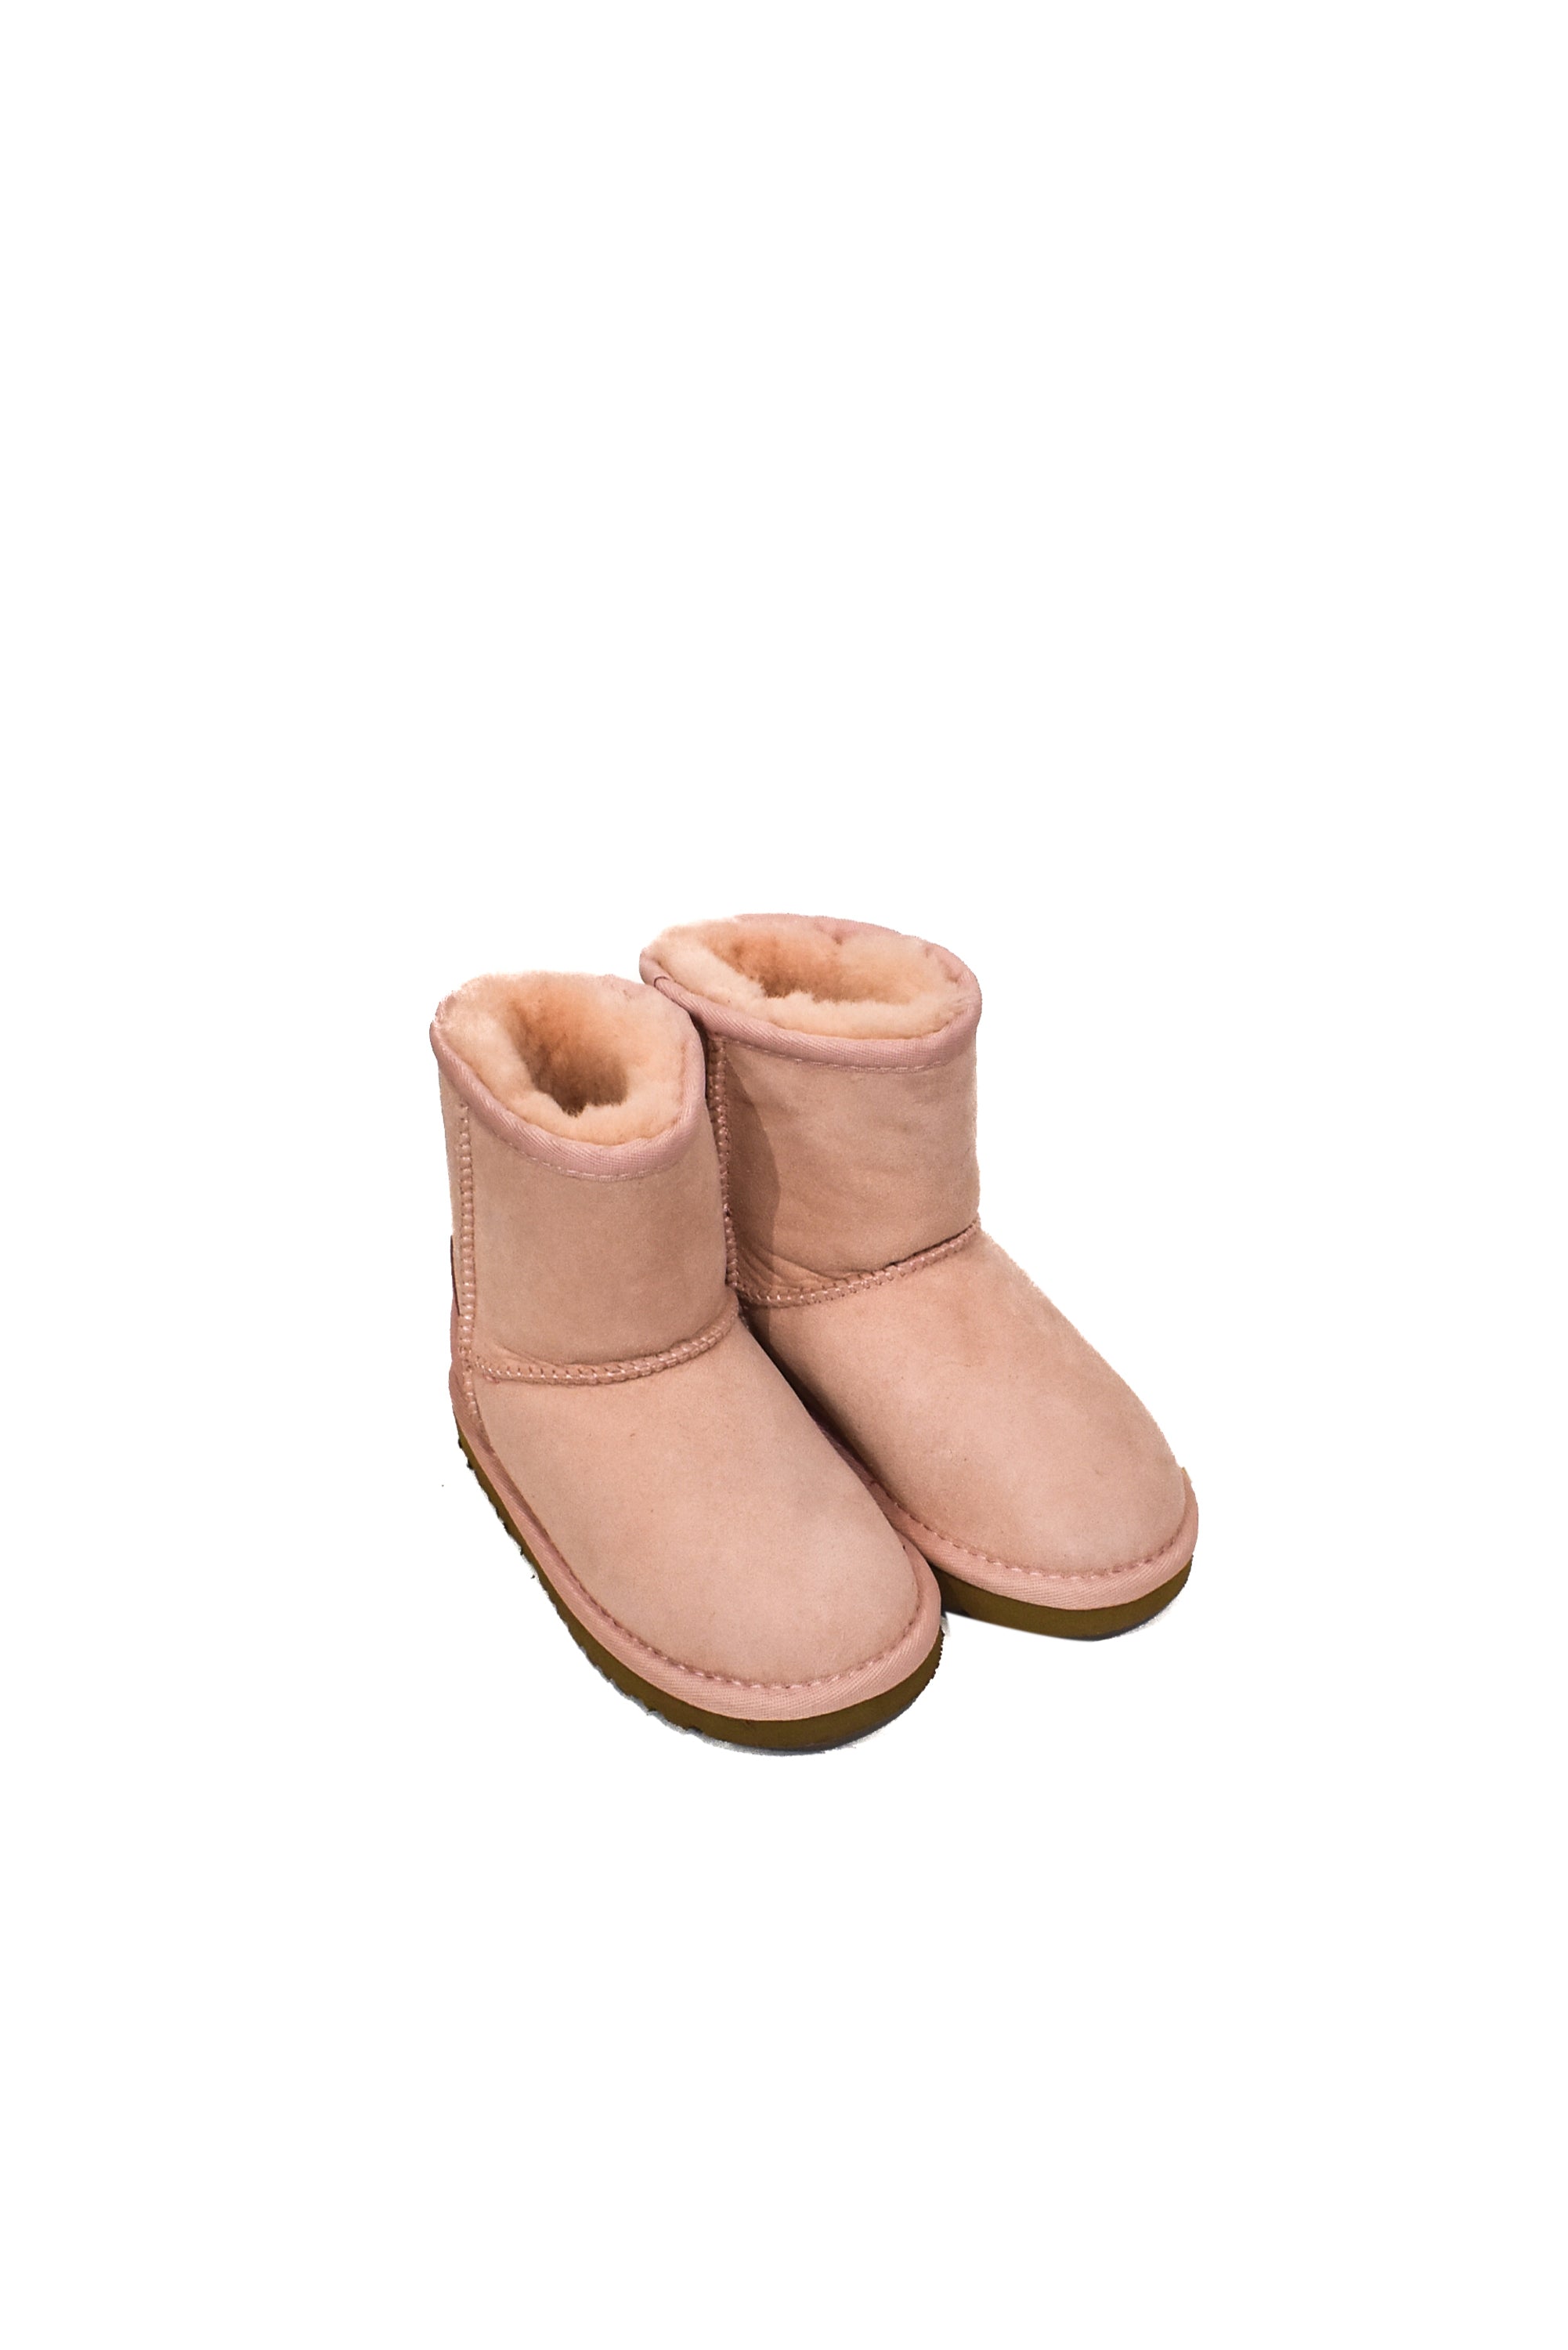 kids uggs size 10